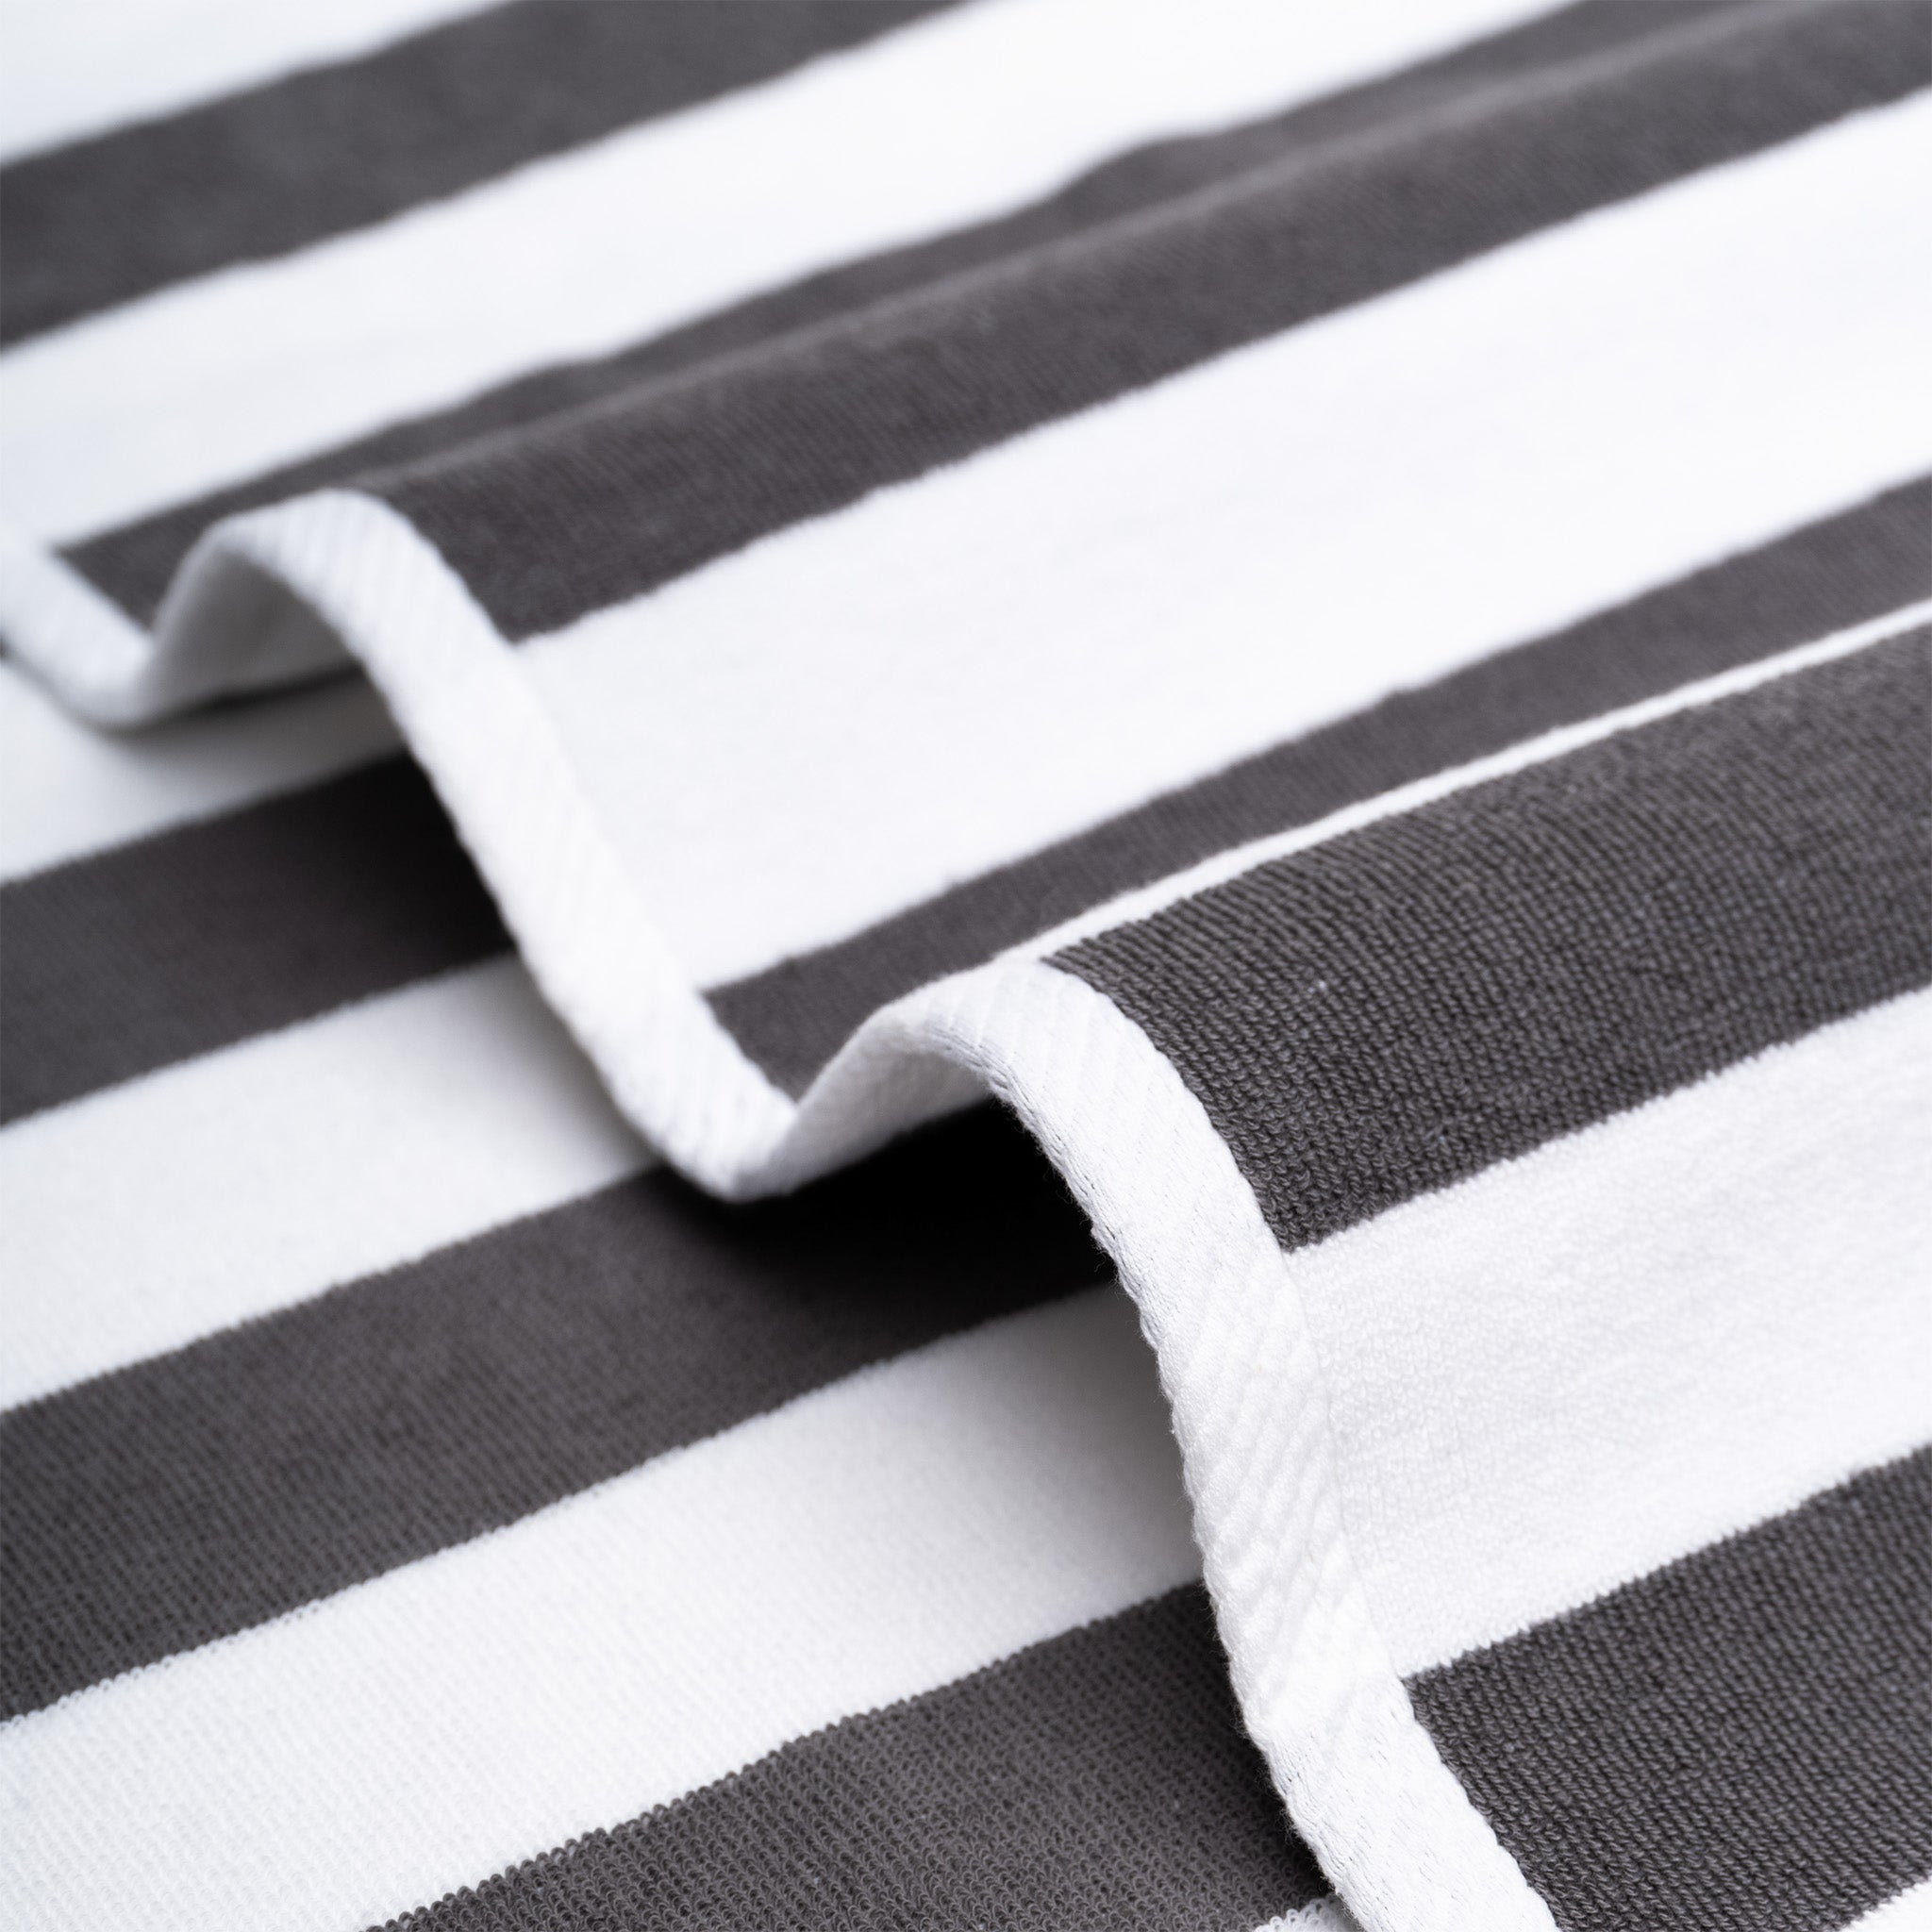 American Soft Linen 100% Cotton 4 Pack Beach Towels Cabana Striped Pool Towels -gray-5